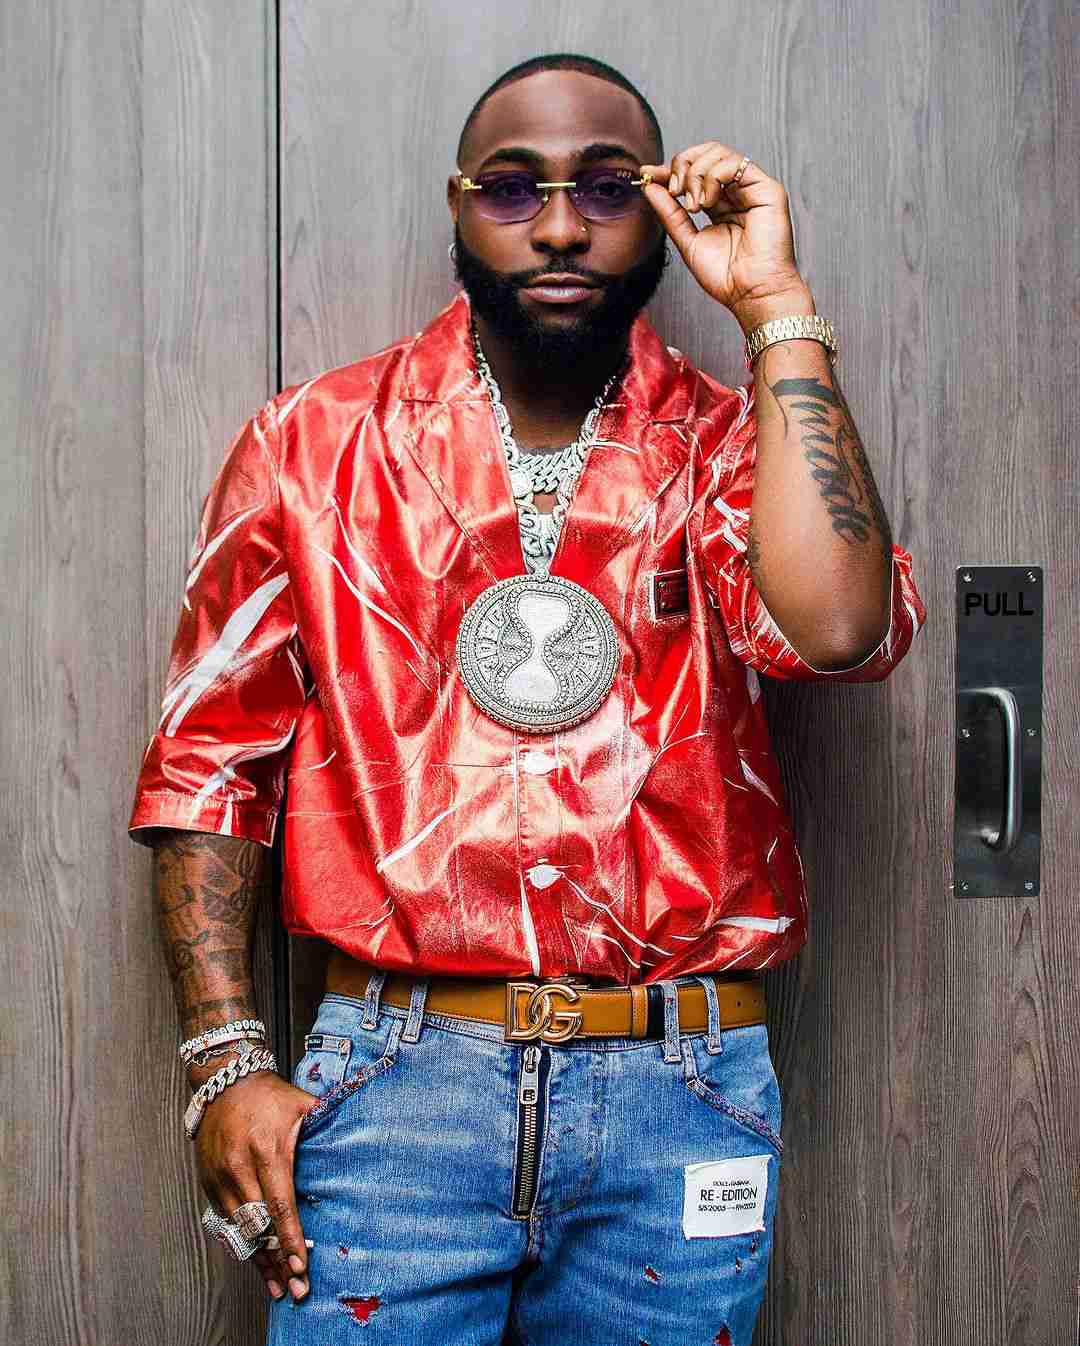 "I told them I wouldn't make it" – Davido finally tells his side of story after being called out by Amaju Pinnick 